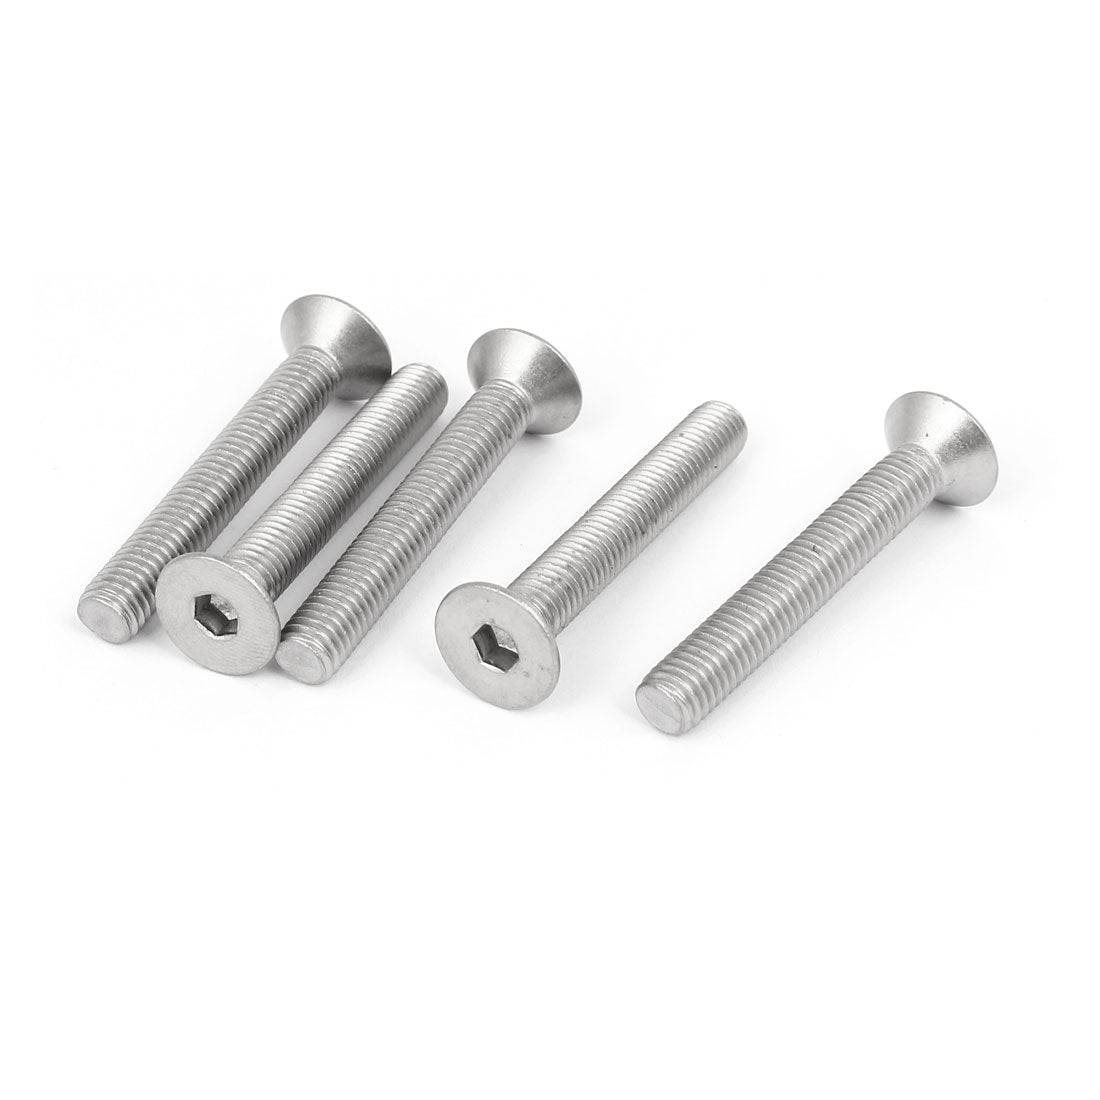 Uxcell Uxcell M8x55mm 304 Stainless Steel Hex Socket Countersunk Flat Head Screw Bolt 5pcs